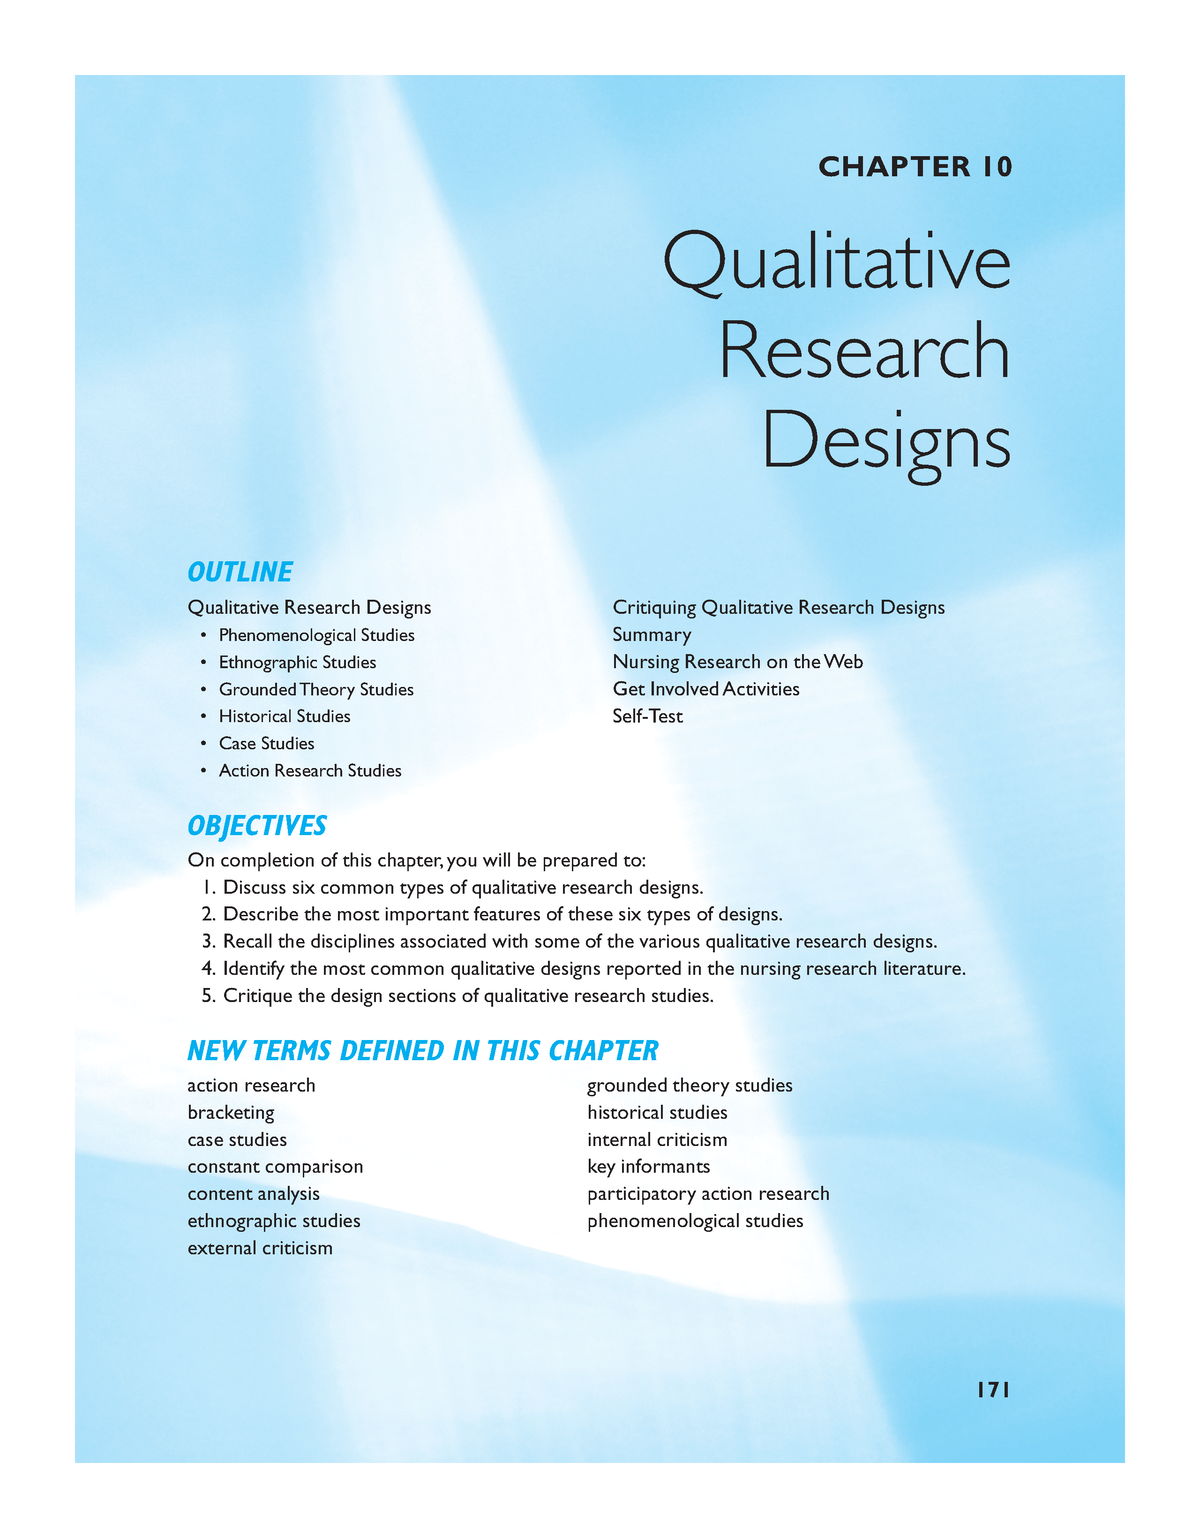 qualitative research designs chapter 10